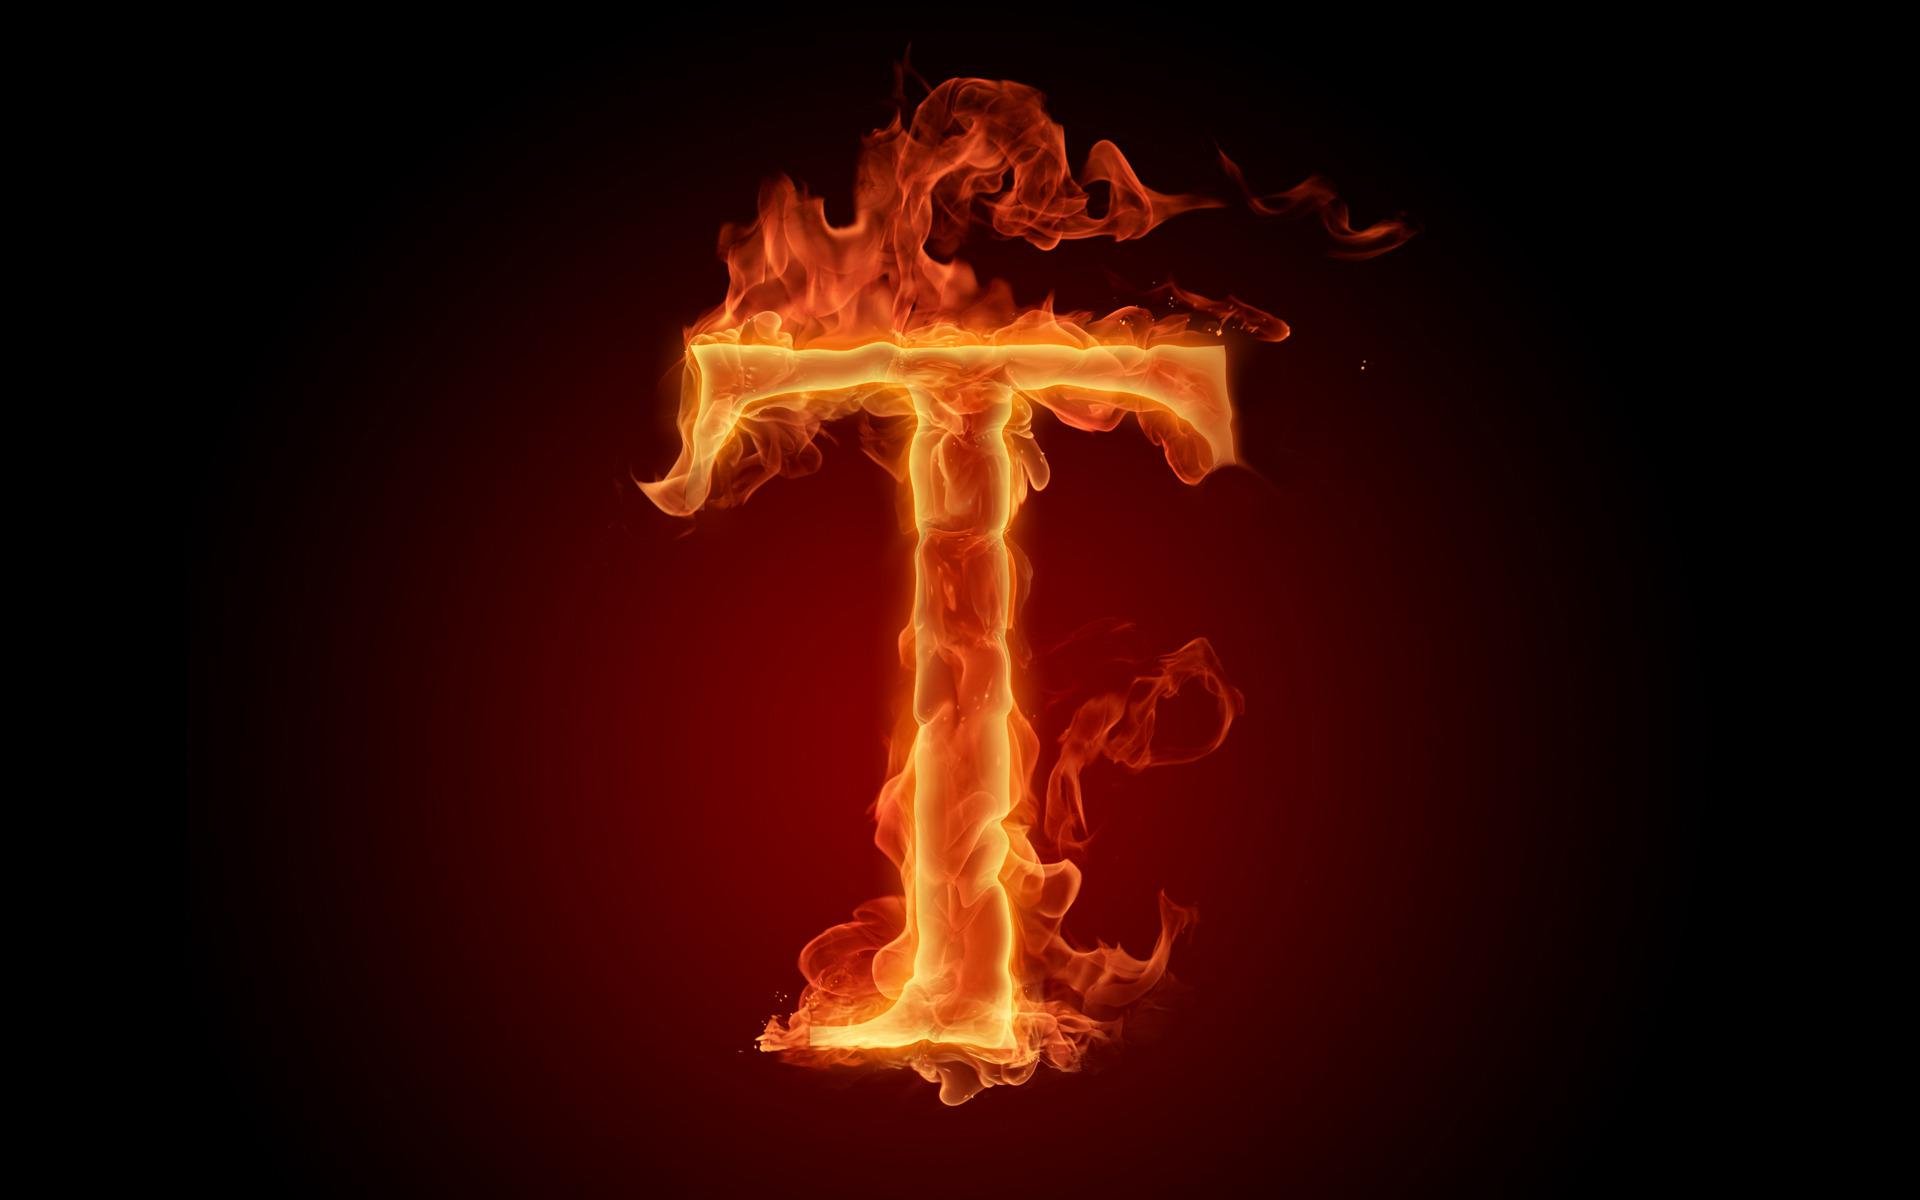 the fiery english alphabet picture t, 1920x1200 Wallpaper